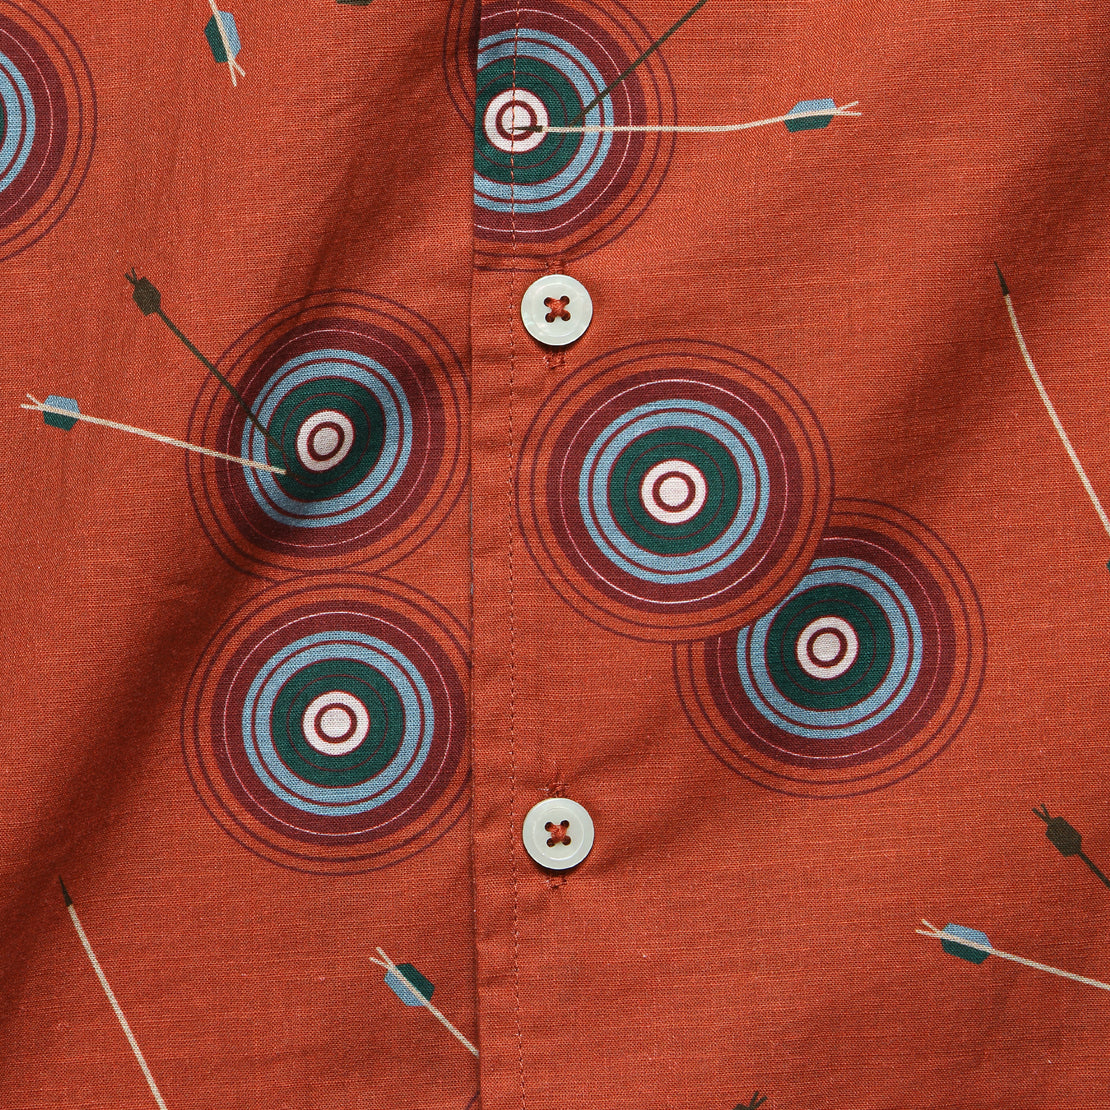 Bullseye Camp Shirt - Clay - Todd Snyder - STAG Provisions - Tops - S/S Woven - Other Pattern